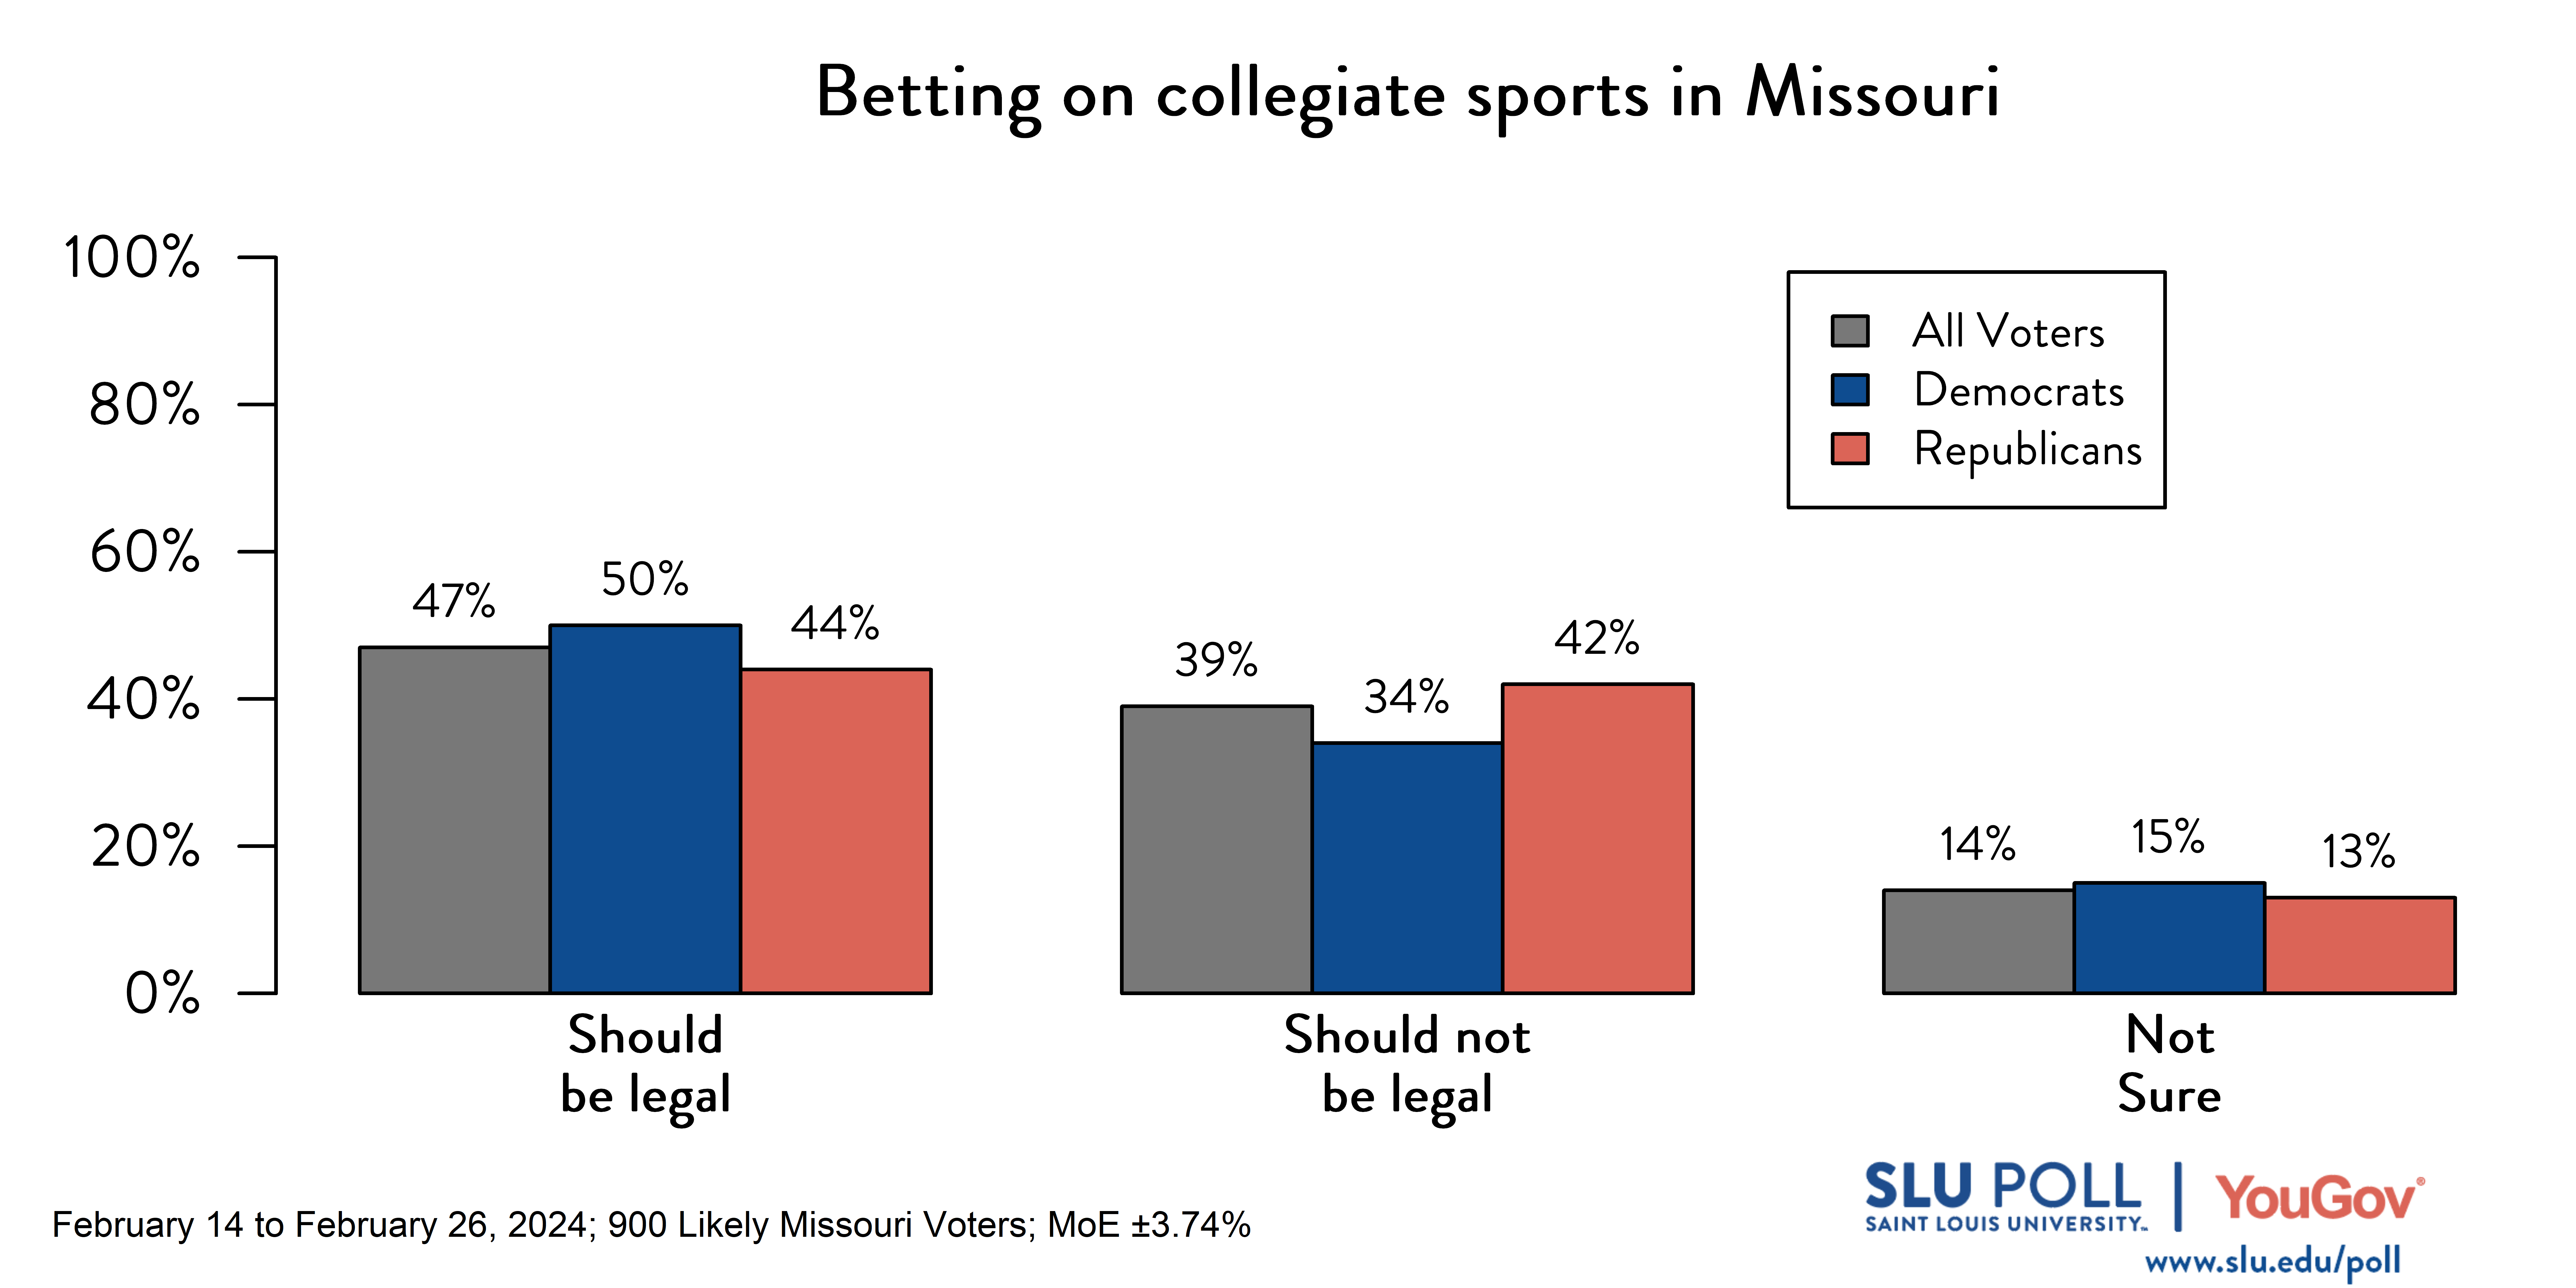 Bar graph of SLU/YouGove Poll results for collegiate sports betting question. Results in the caption.